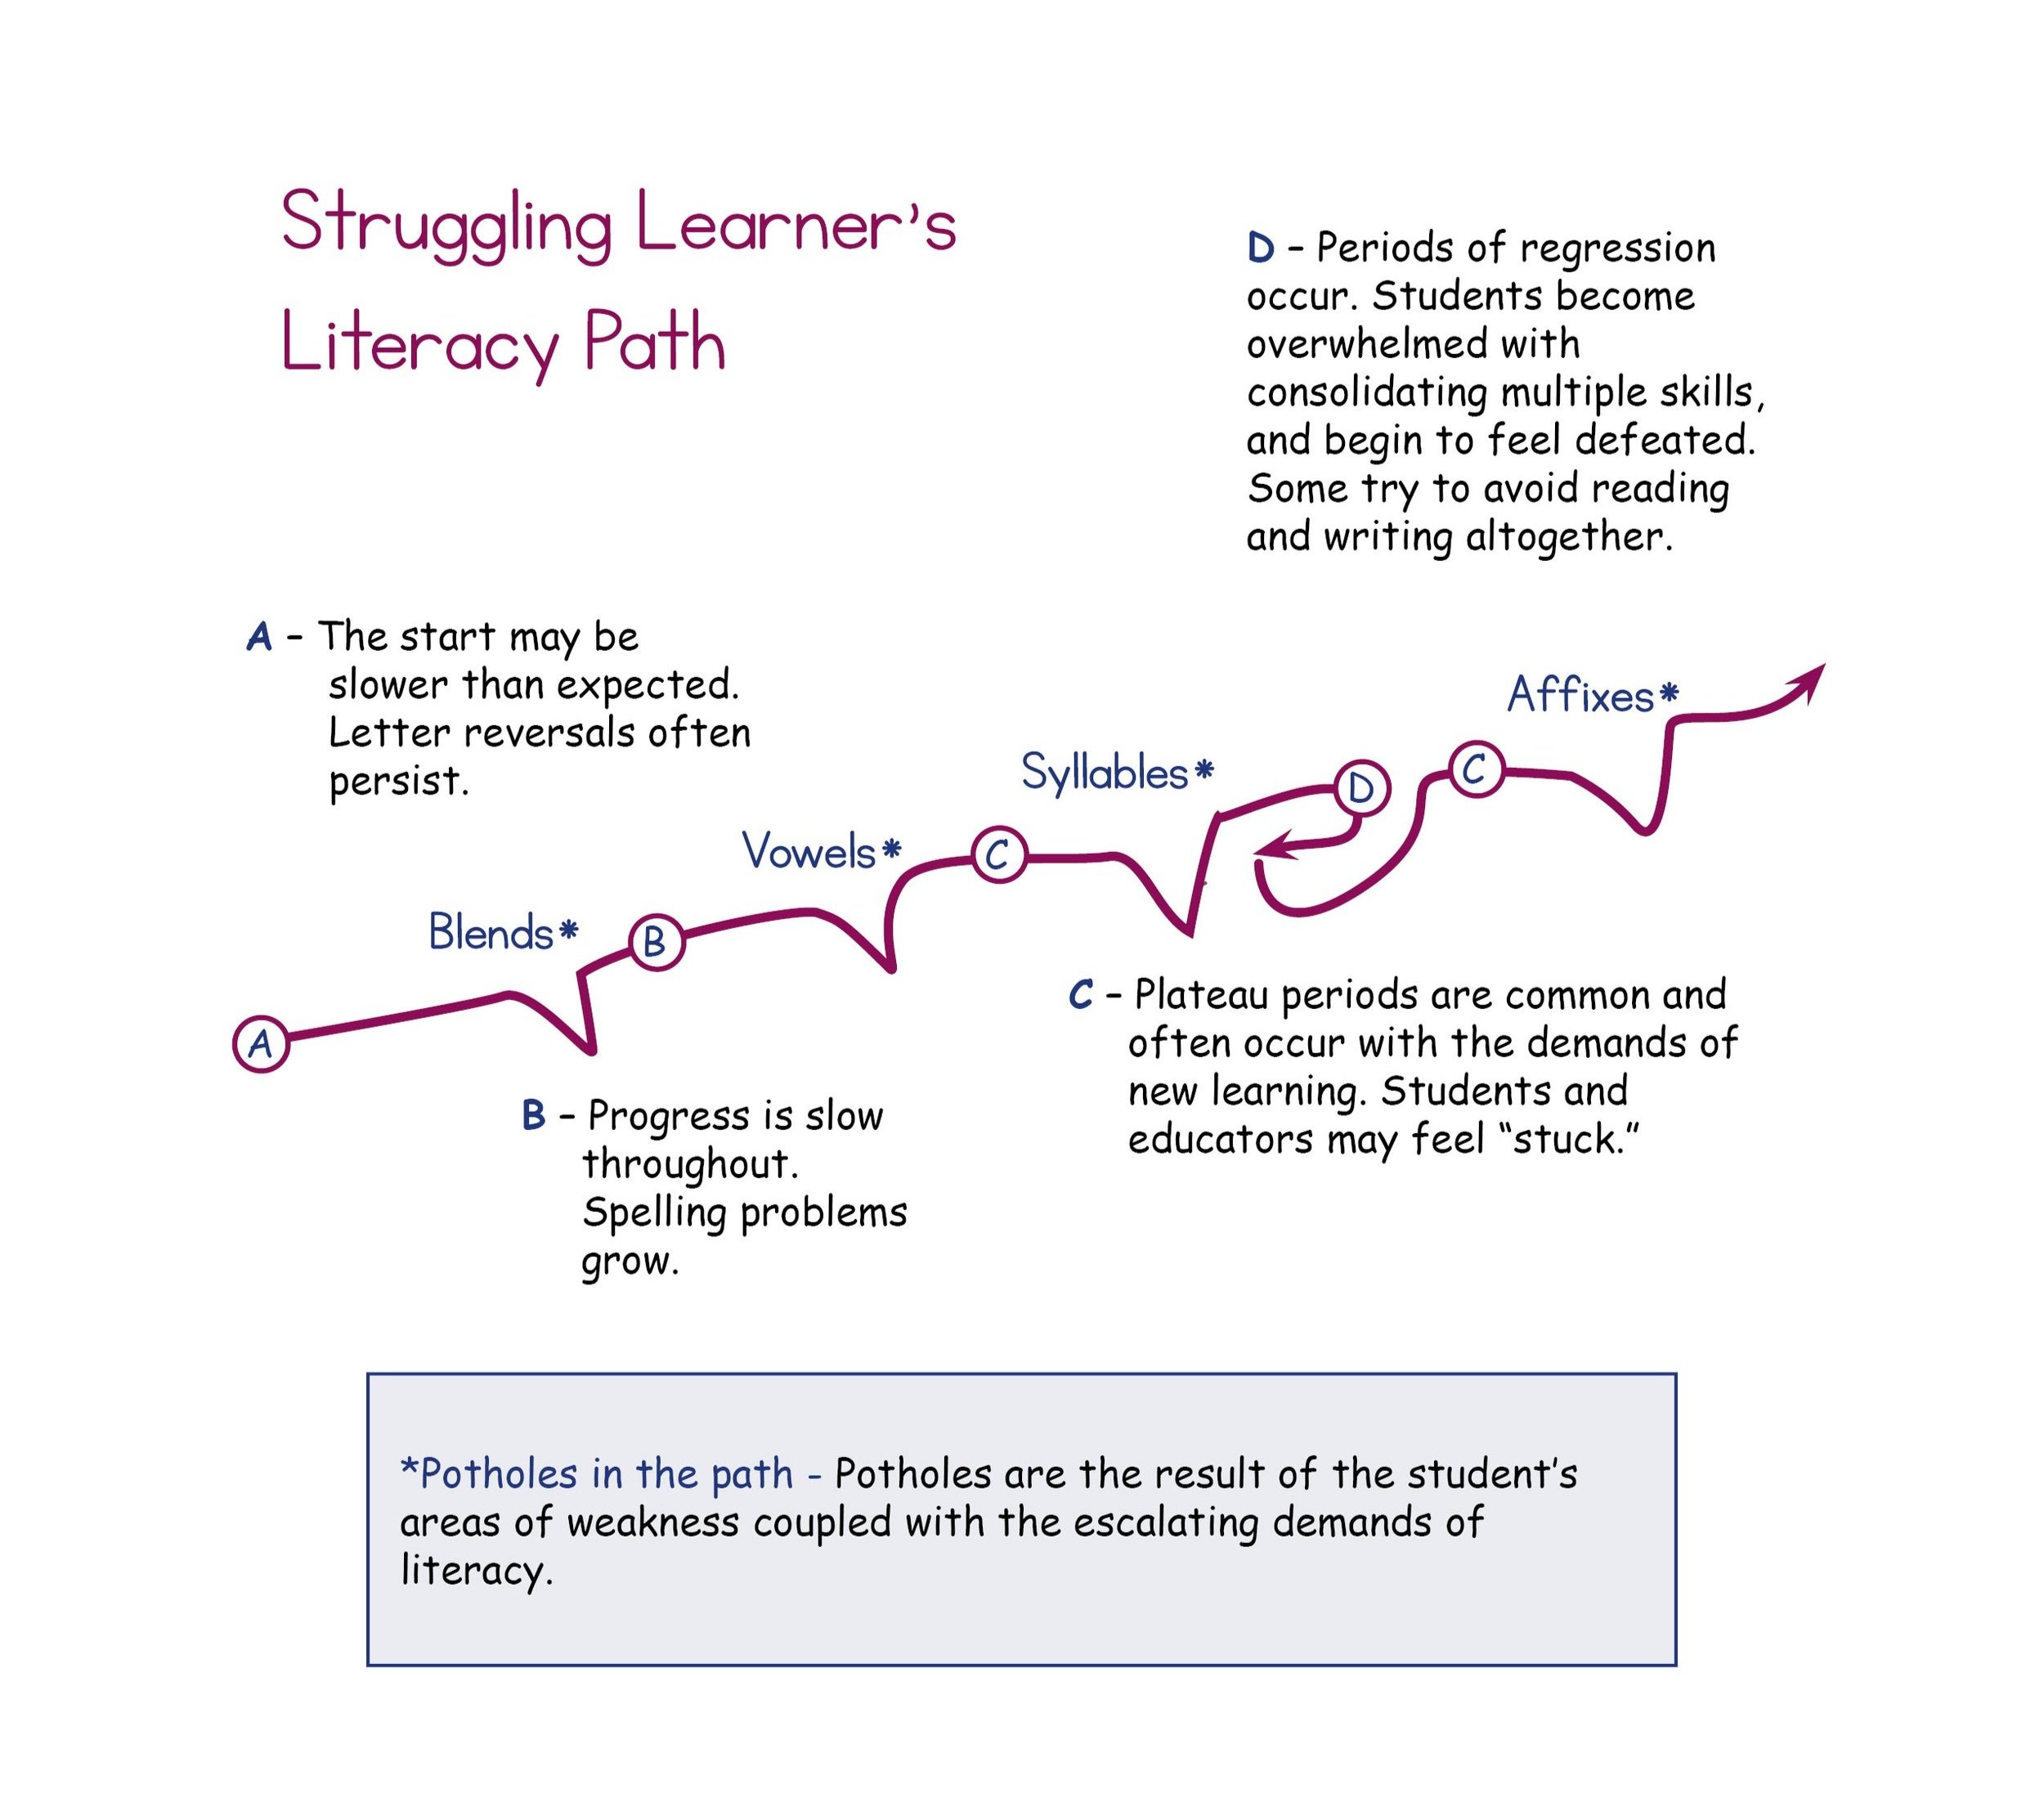 What is Playing with Words? – Paths to Literacy